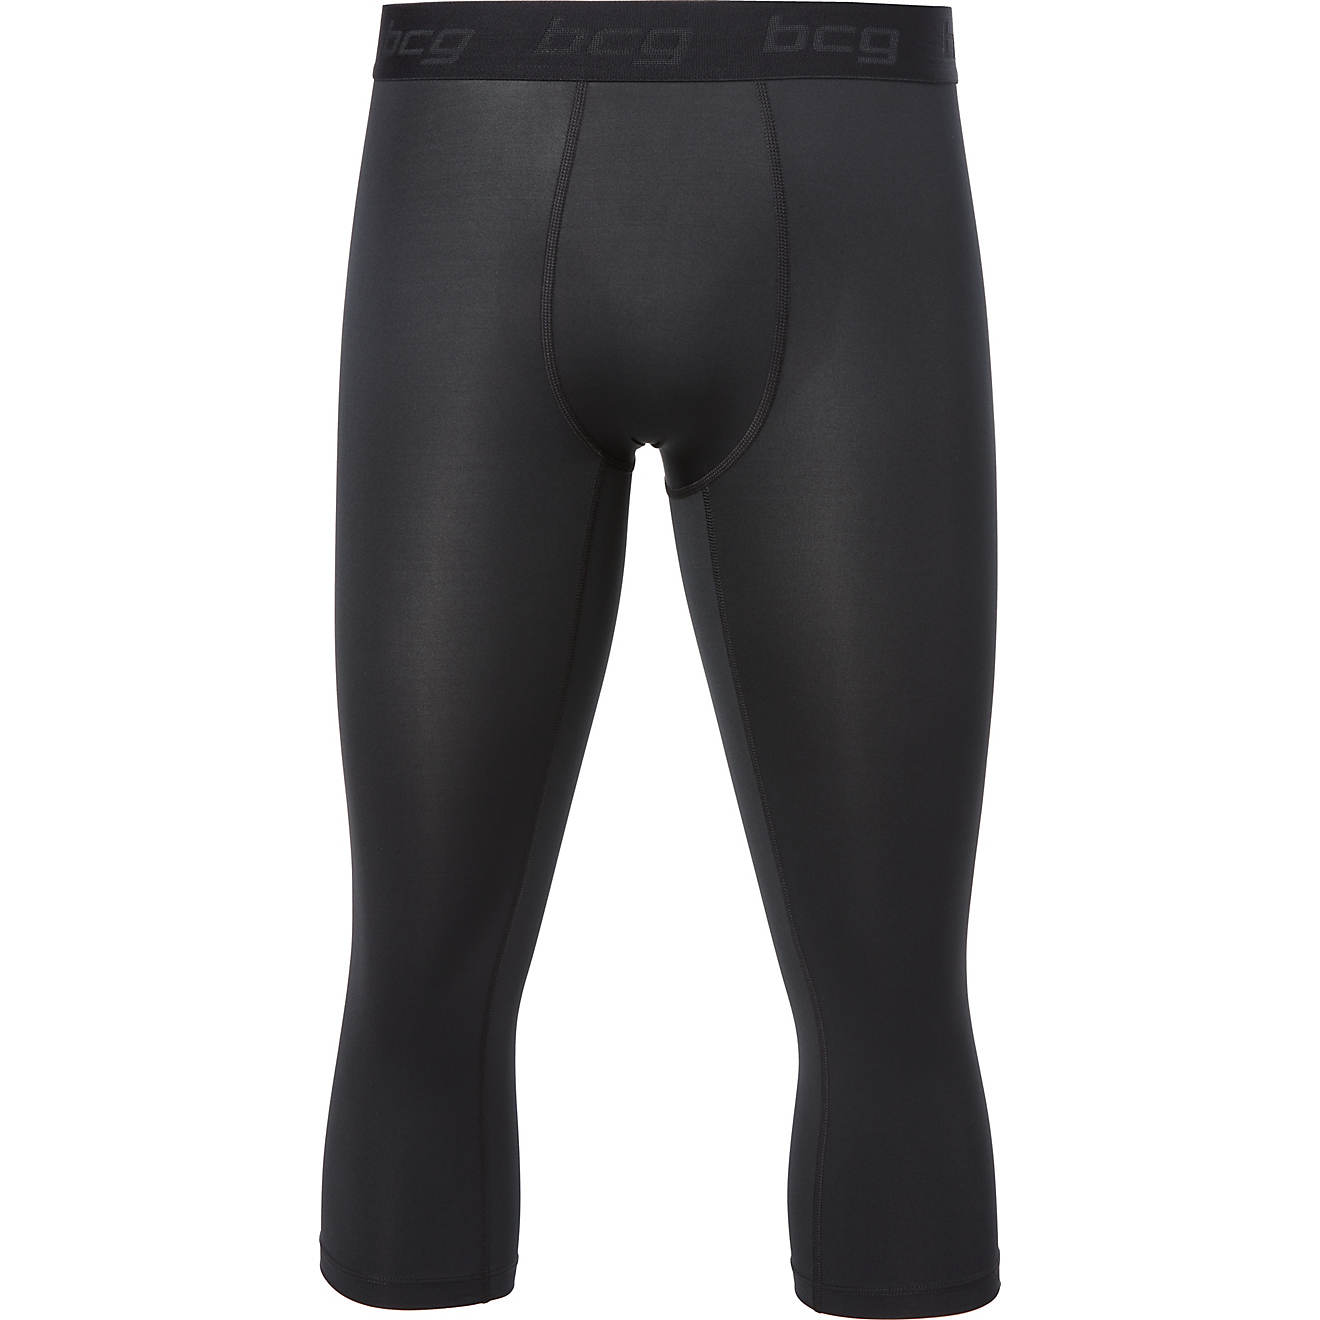 BCG Men's 3/4-Length Compression Tights                                                                                          - view number 1